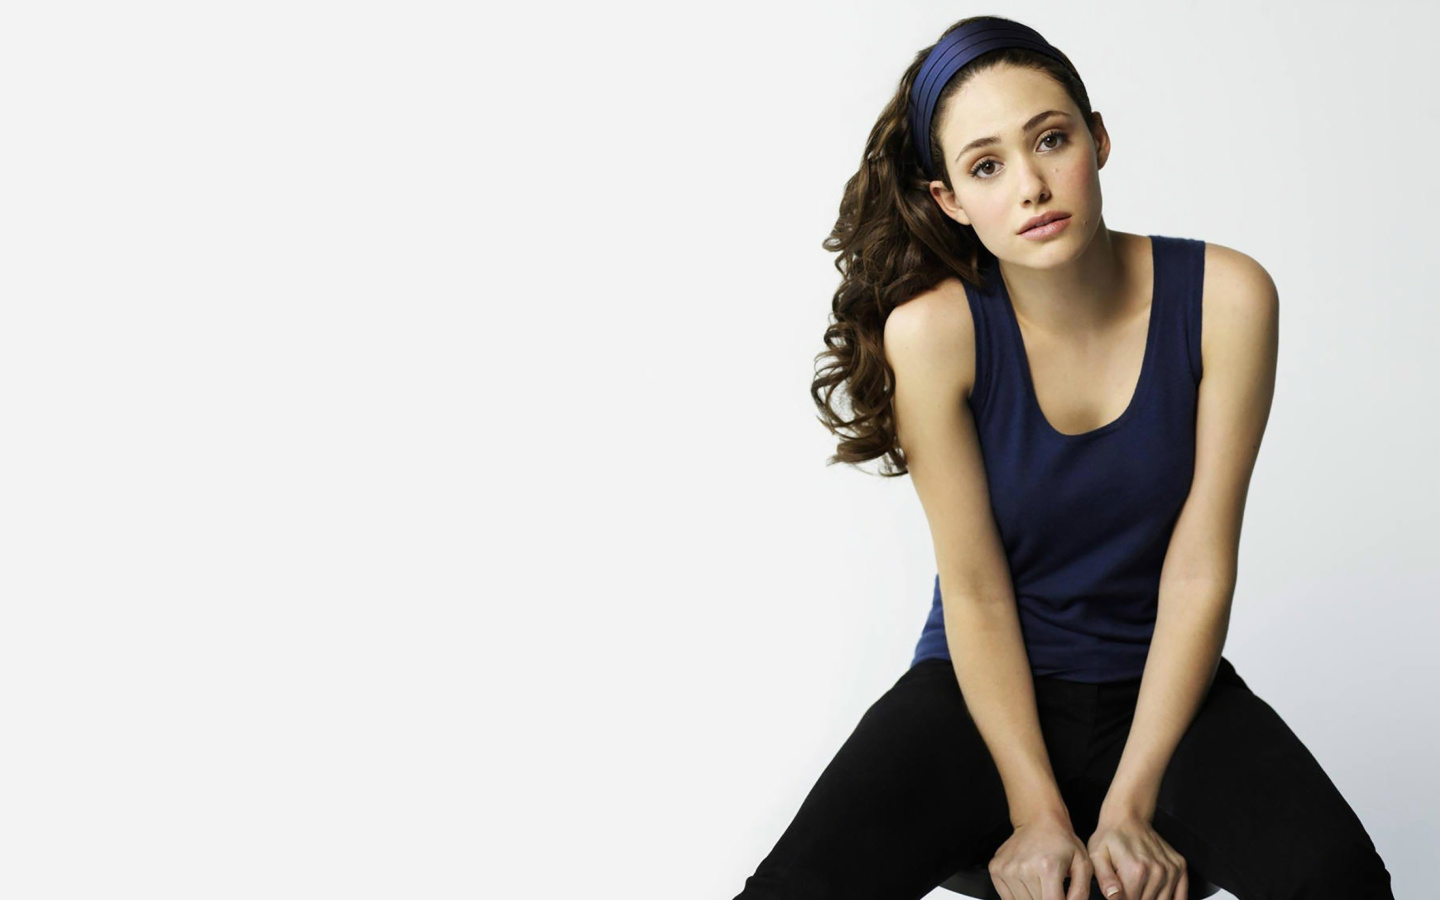 Emmy Rossum in Sweet Clothes wallpaper 1440x900